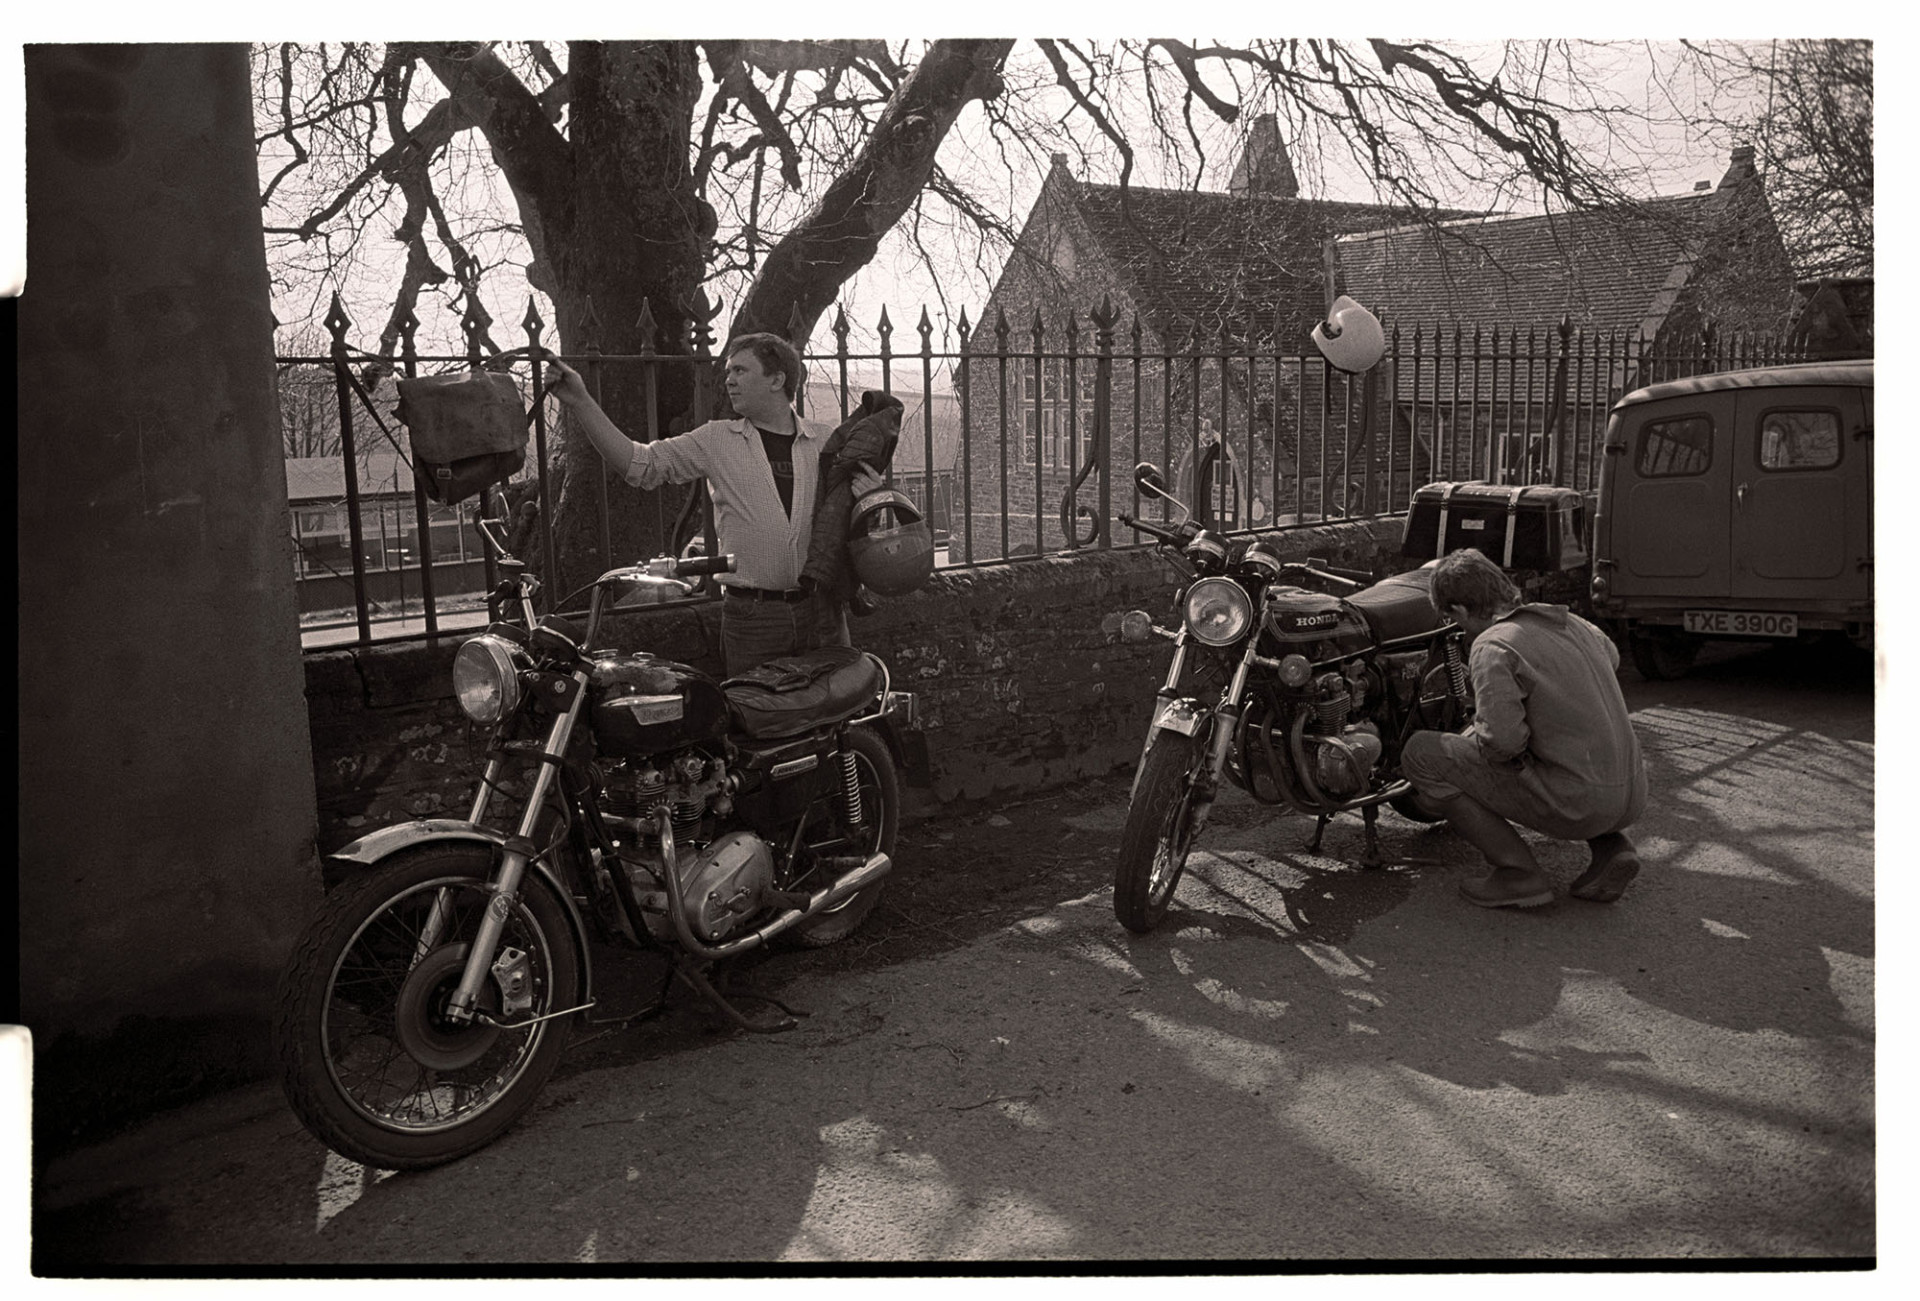 Street scene with parked motorbikes. 
[Two men with their parked motorcycles by railings on a street in Chulmleigh. A building, possibly the school, is in the background.]